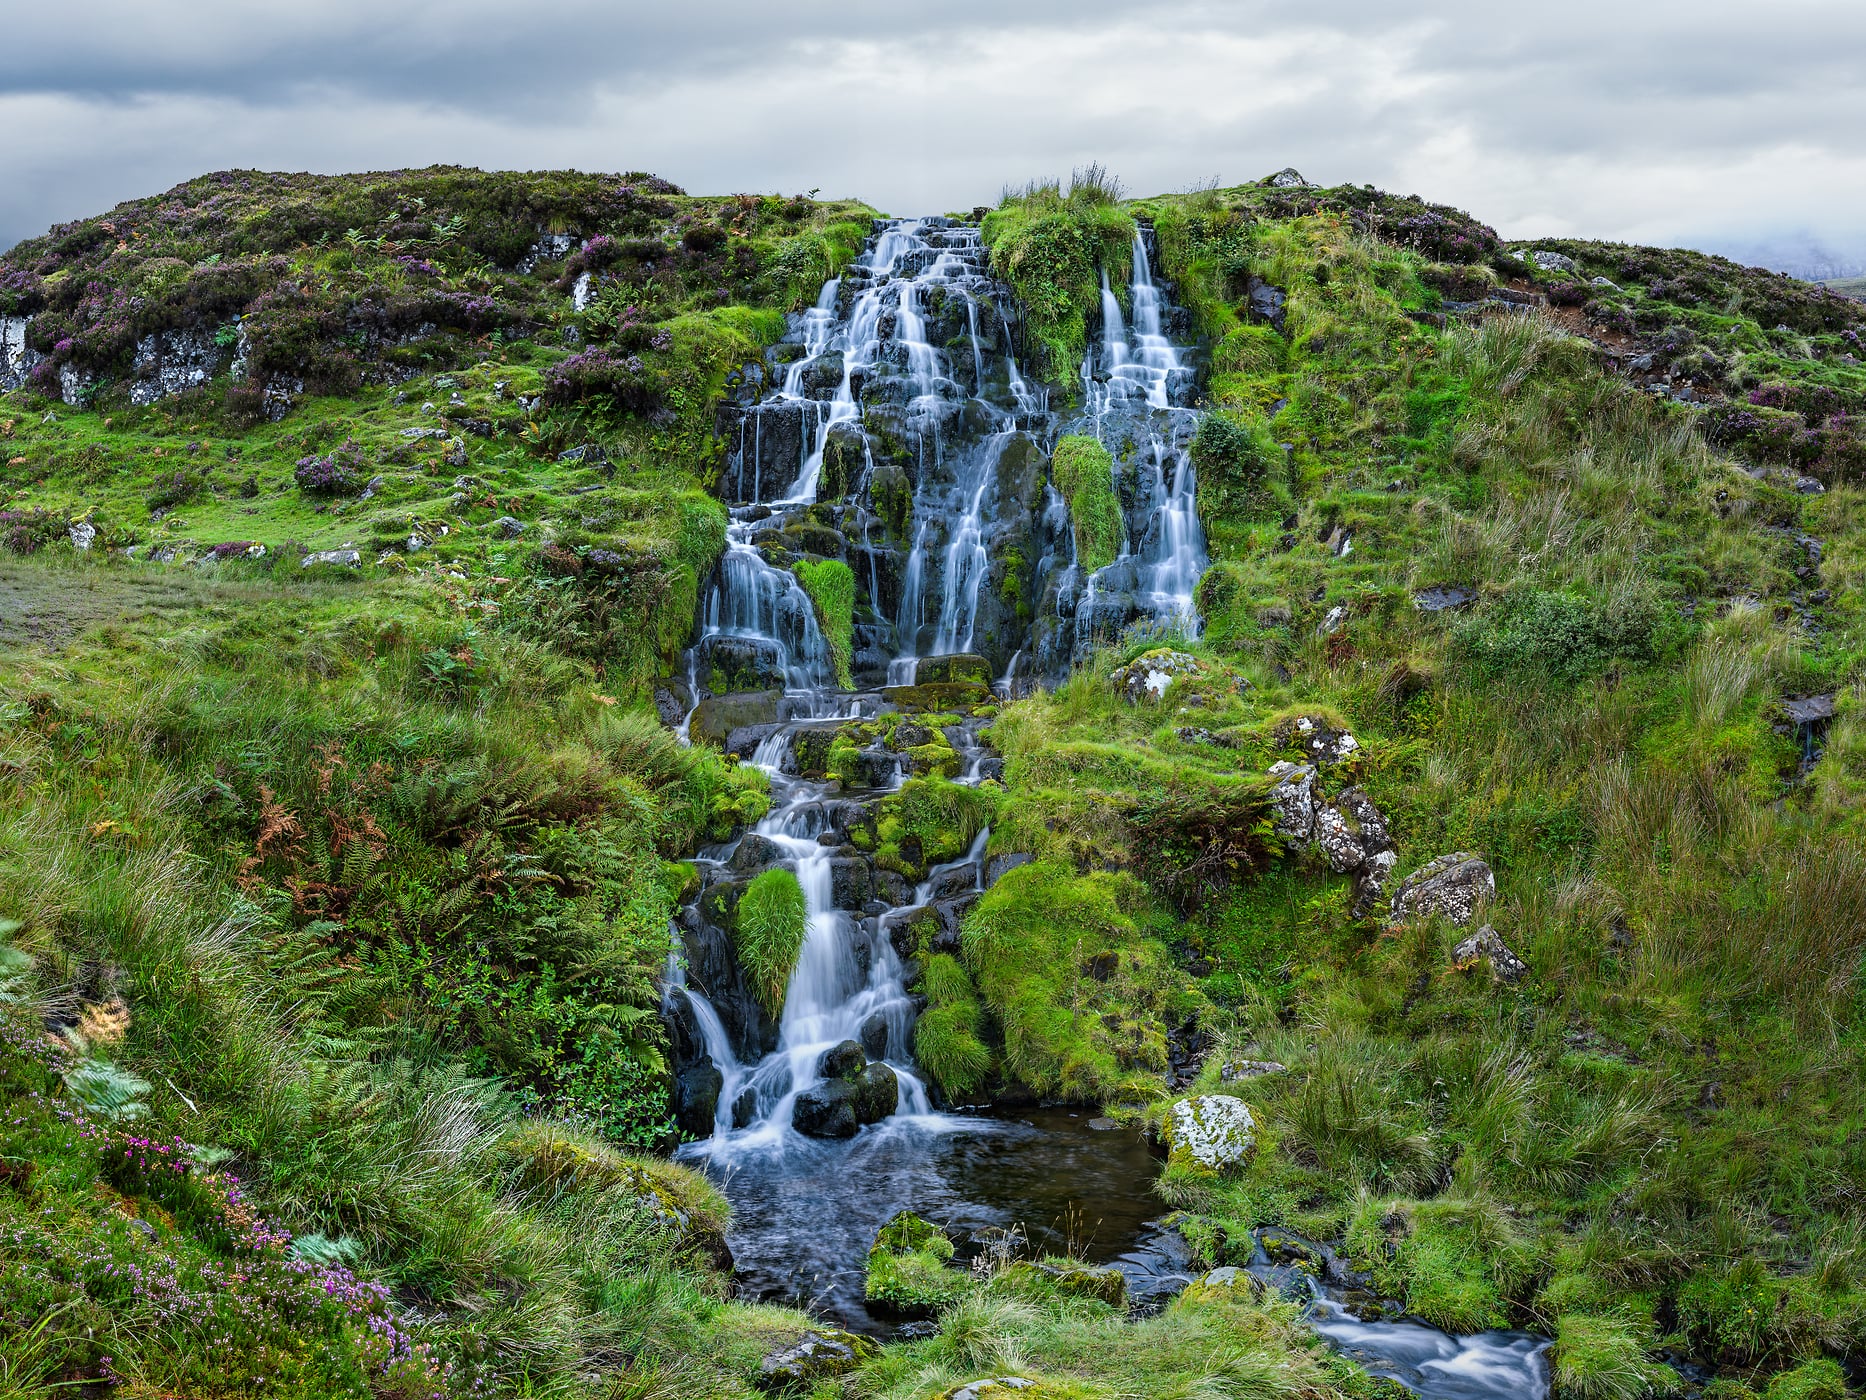 912 megapixels! A very high resolution, large-format VAST photo print of a waterfall in Scotland; nature photograph created by Scott Dimond in Isle of Skye, Scotland.